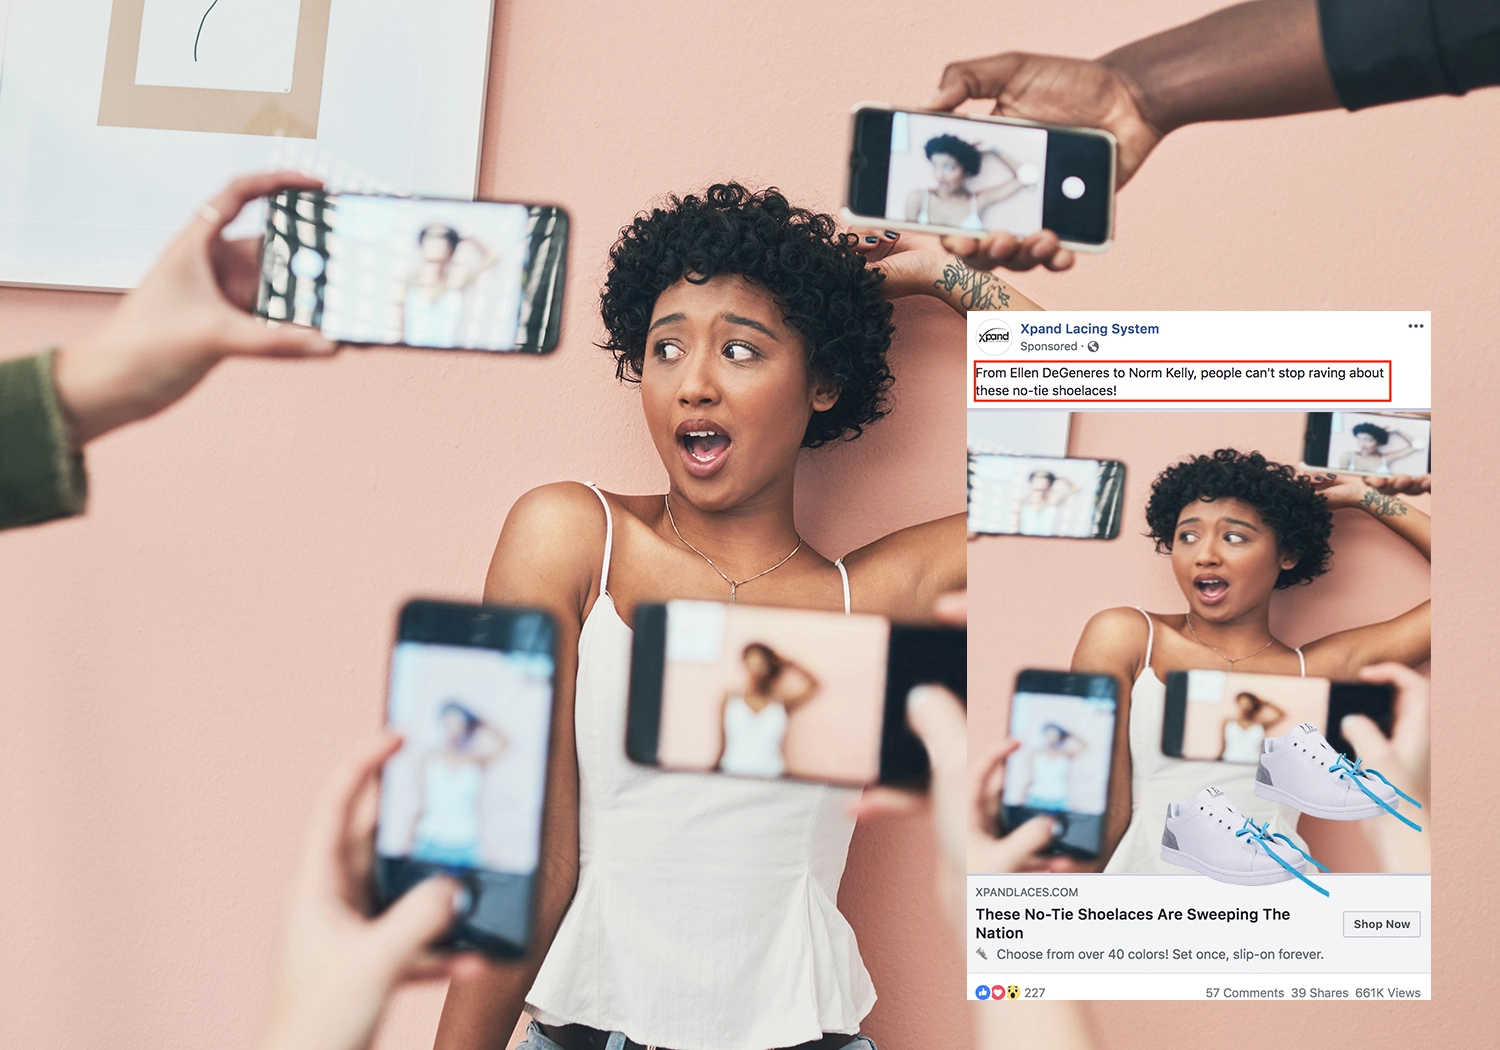 A surprised young woman in a white tank top reacts while multiple smartphones are pointed at her to take photos, illustrating social proof on a neutral-colored background.